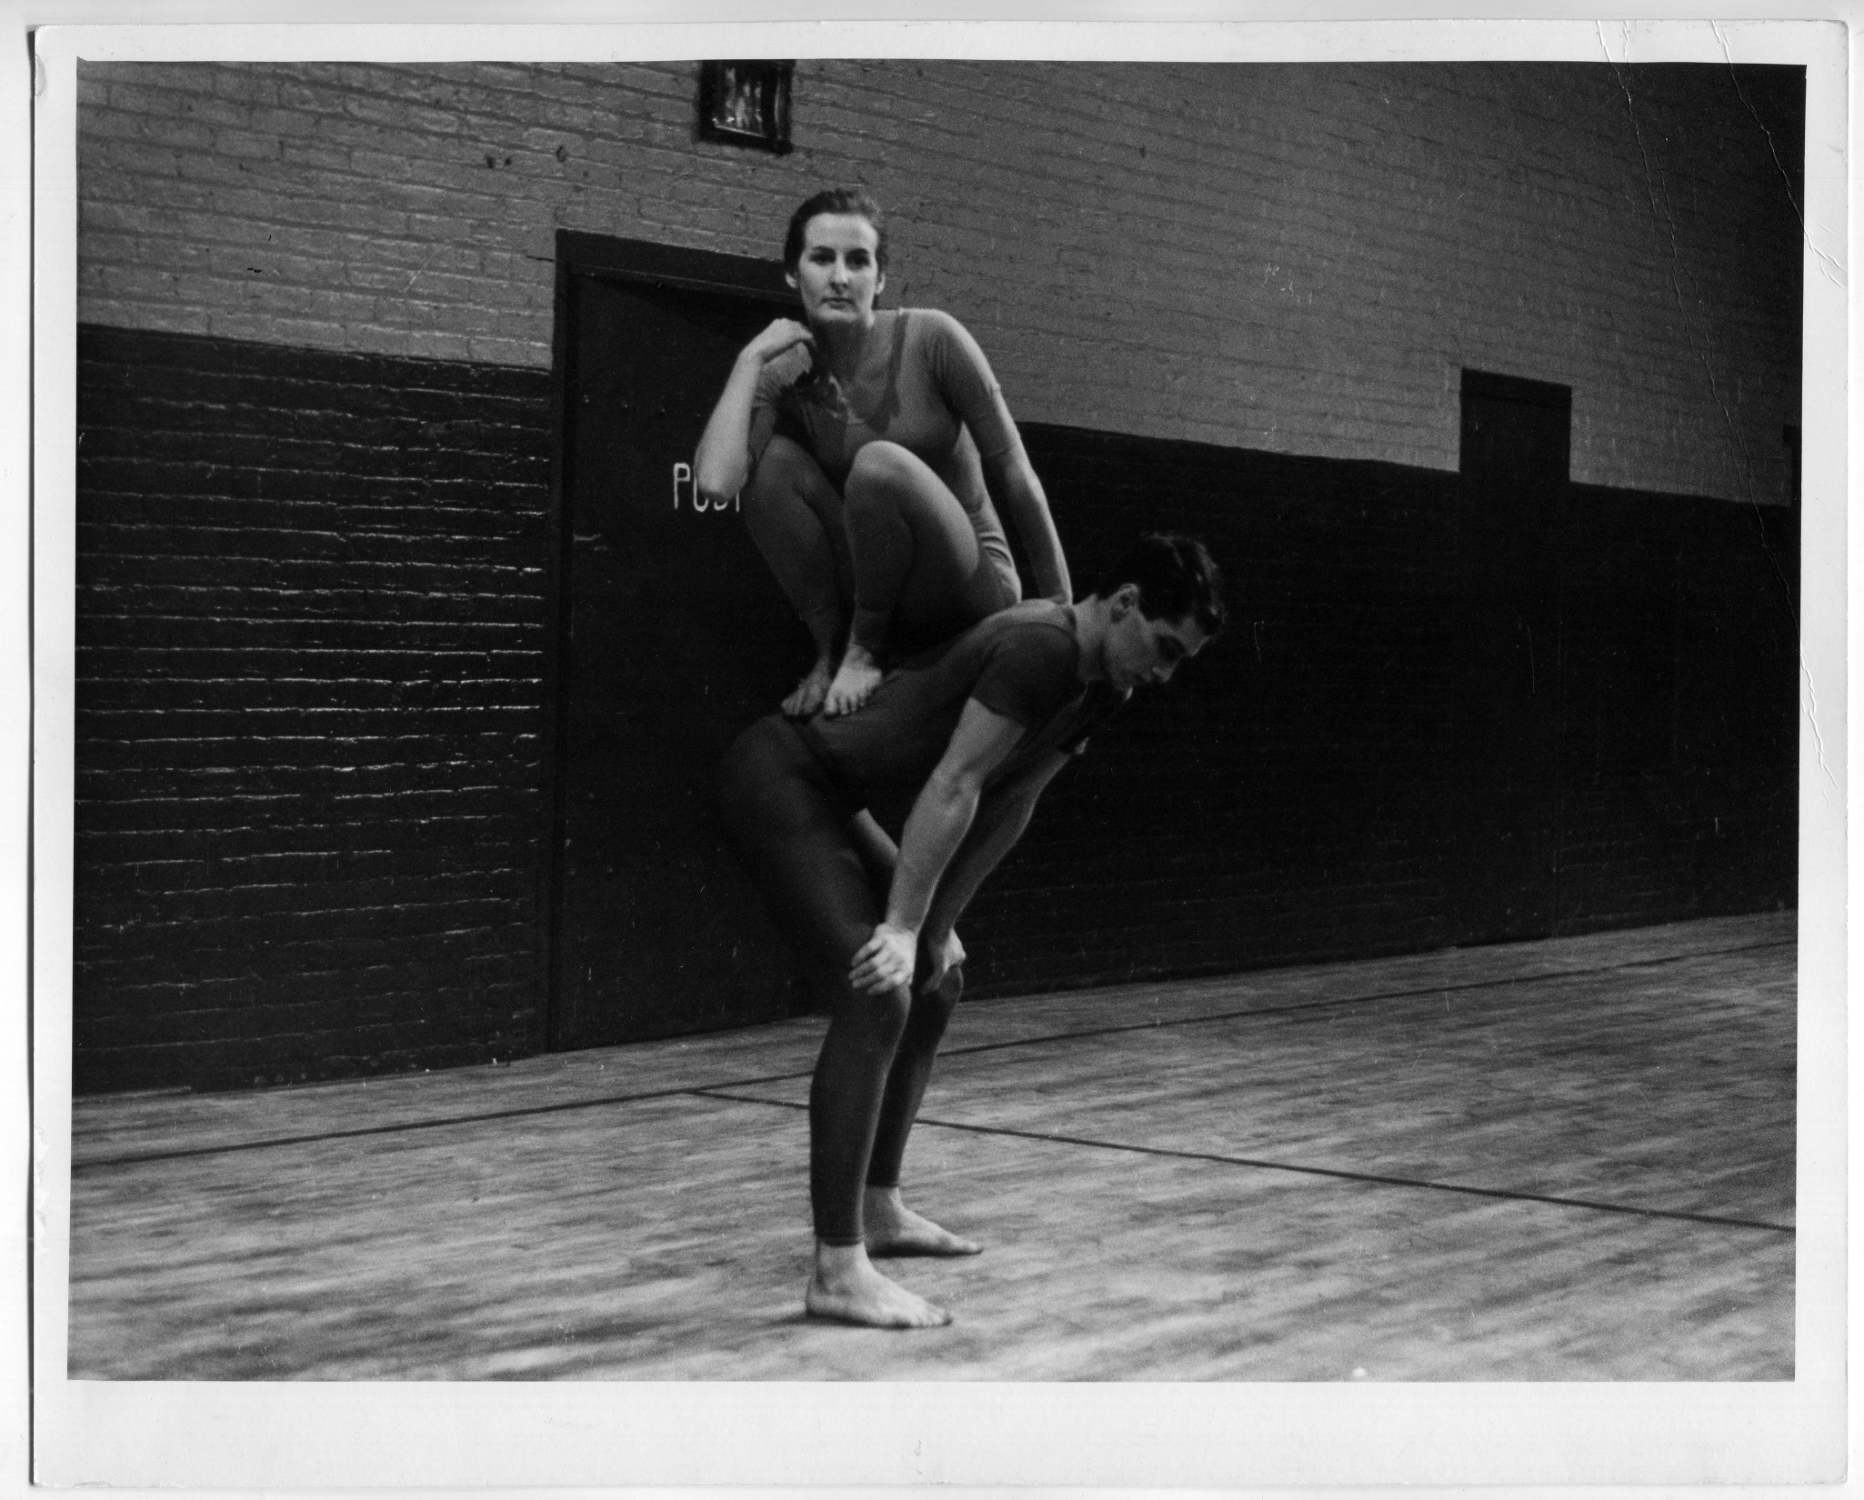 Trisha Brown and Steve Paxton in Lightfall (1963). Performed at Concert of Dance # 4, Judson Memorial Church, January 30, 1963. Photograph by Peter Moore. © Northwestern University.